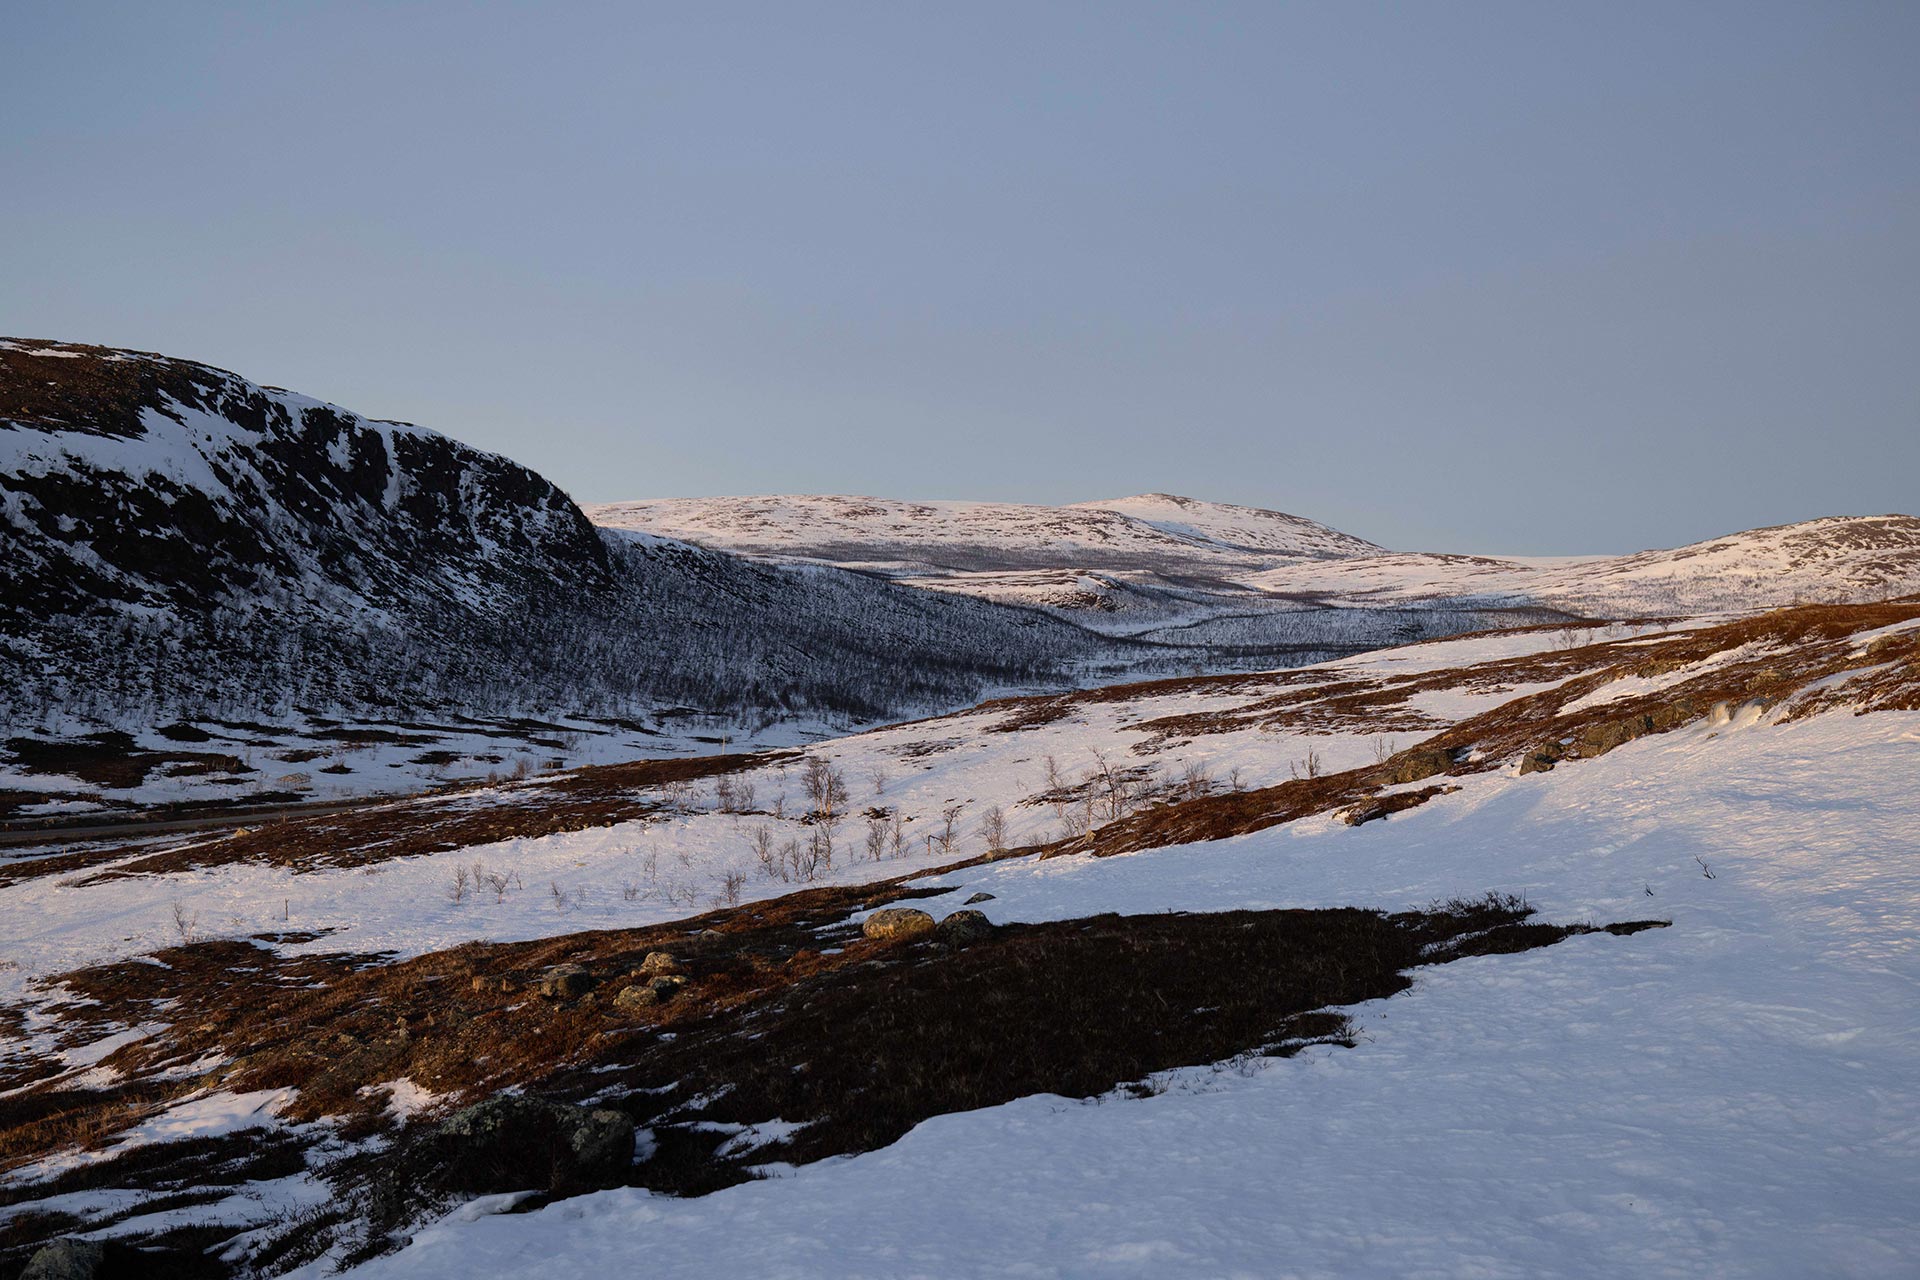 View of the Arctic tundra landscape patchy snow clear sky